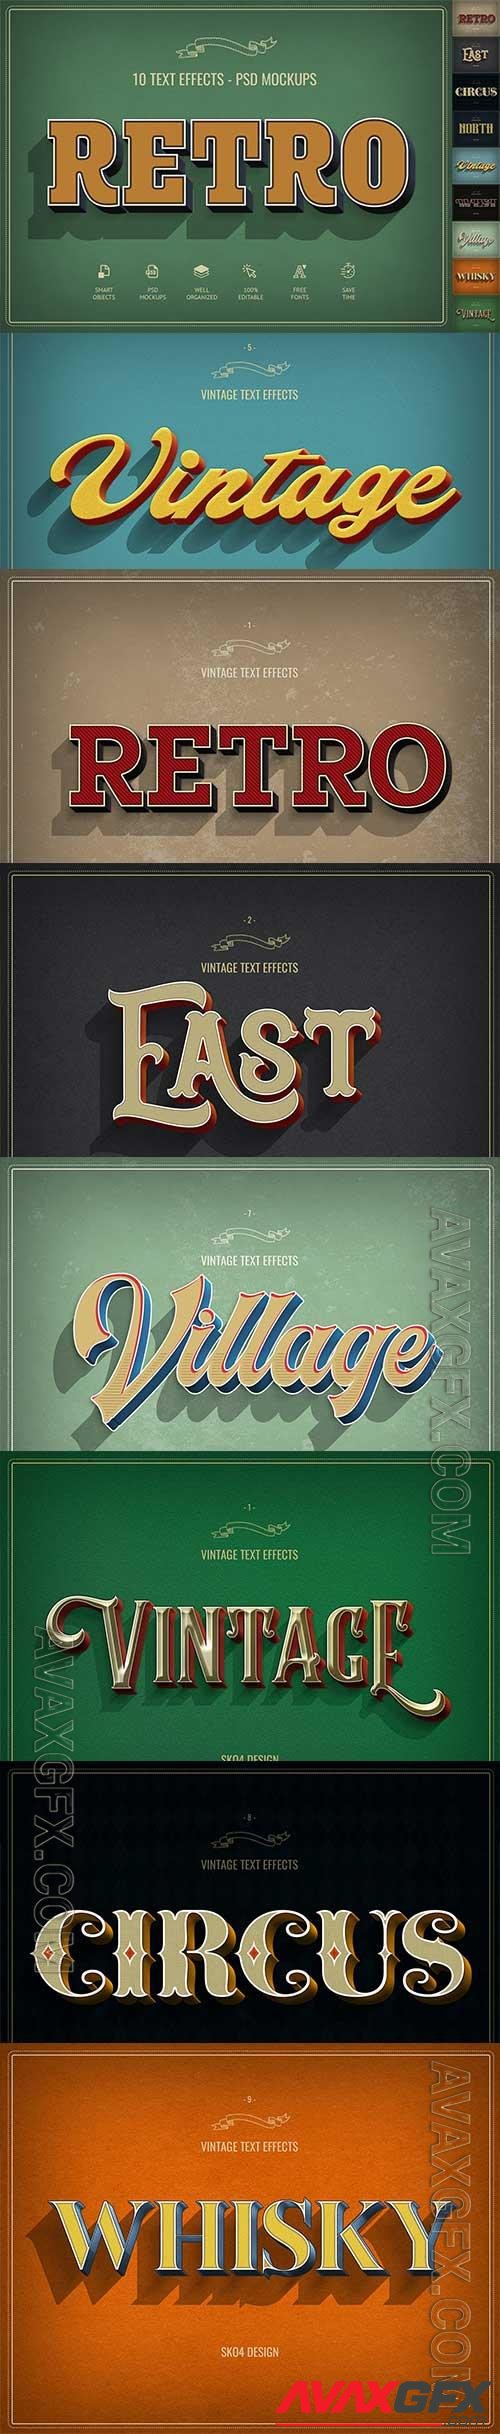 Retro Text Effects Psd